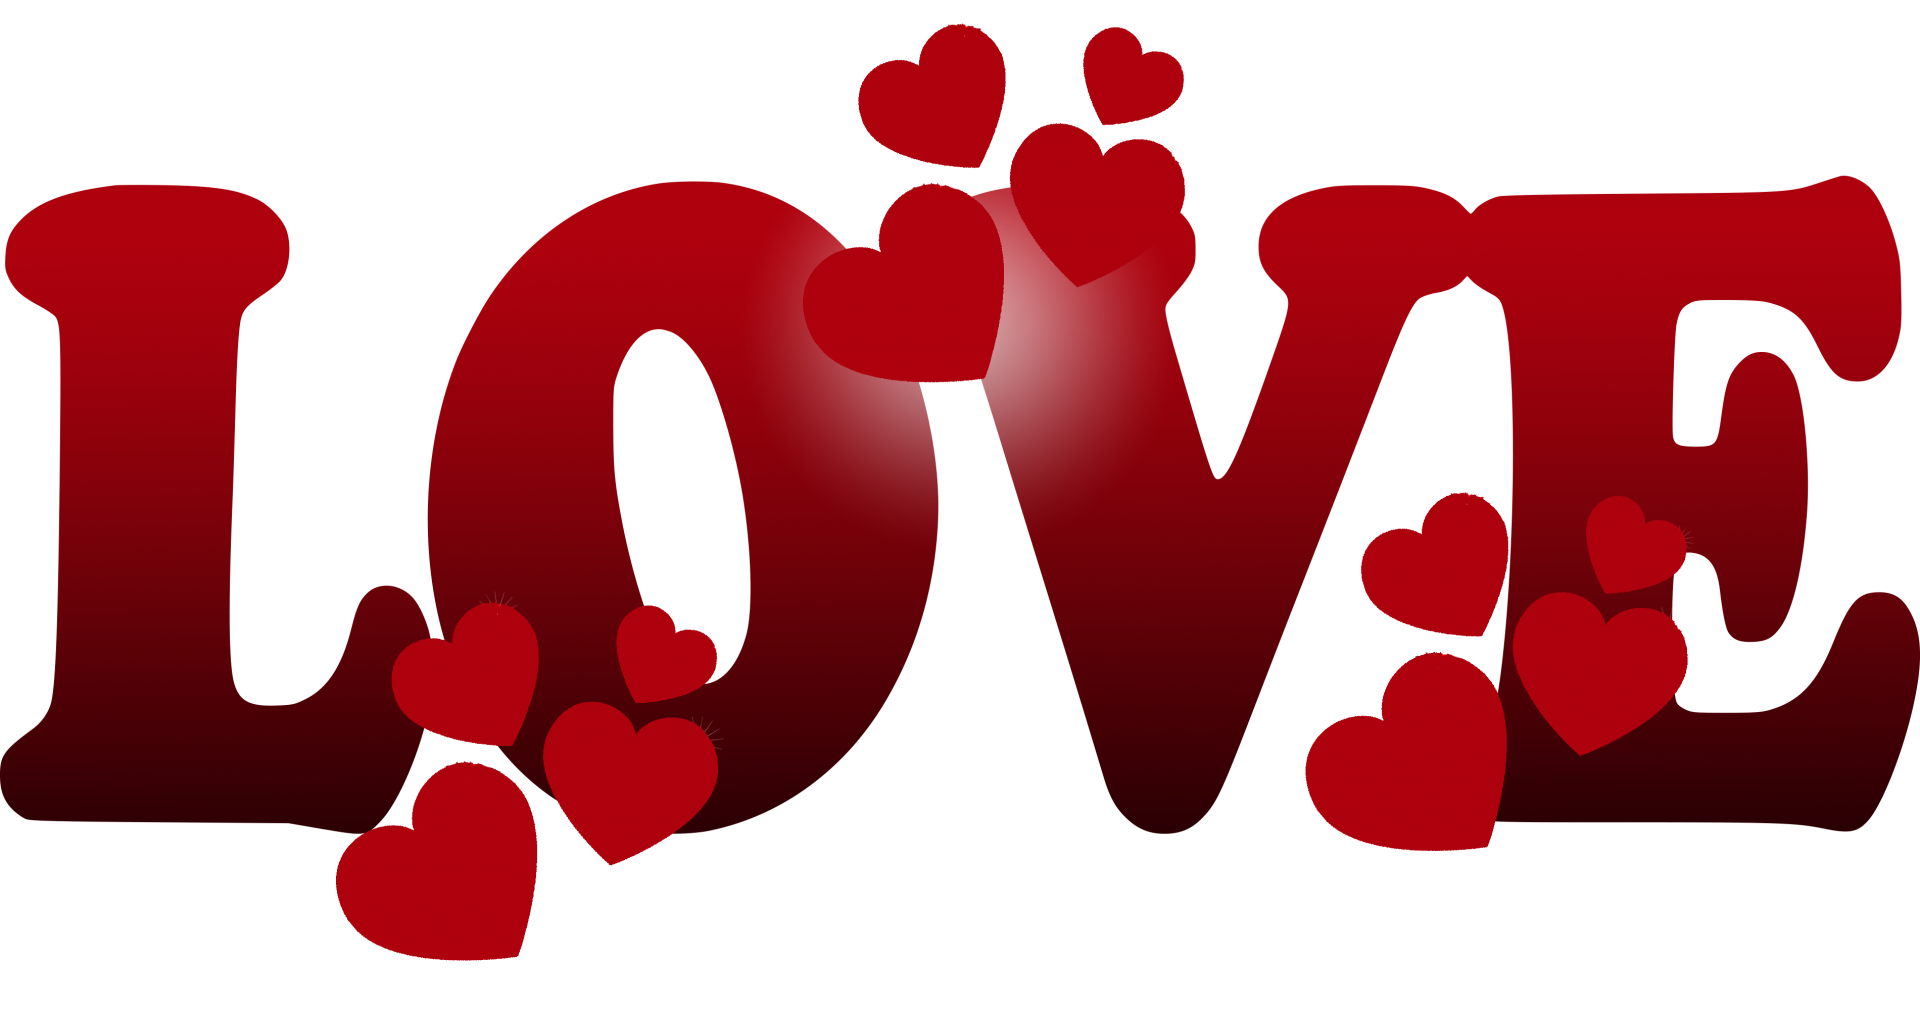 Love banner for greeting card or web